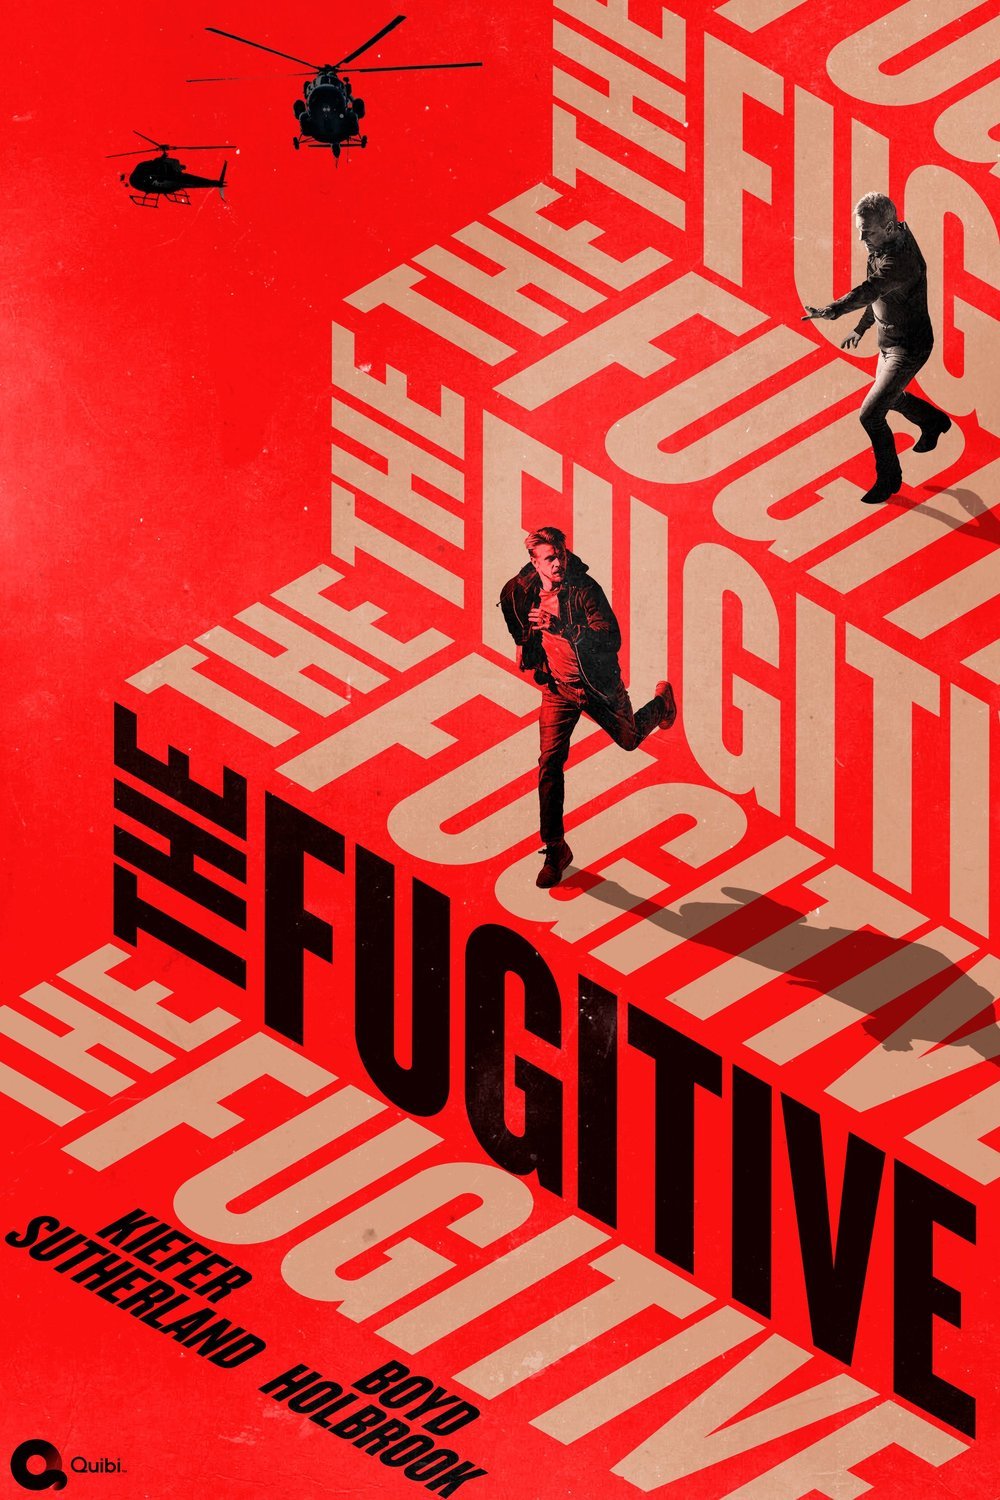 Poster of the movie The Fugitive